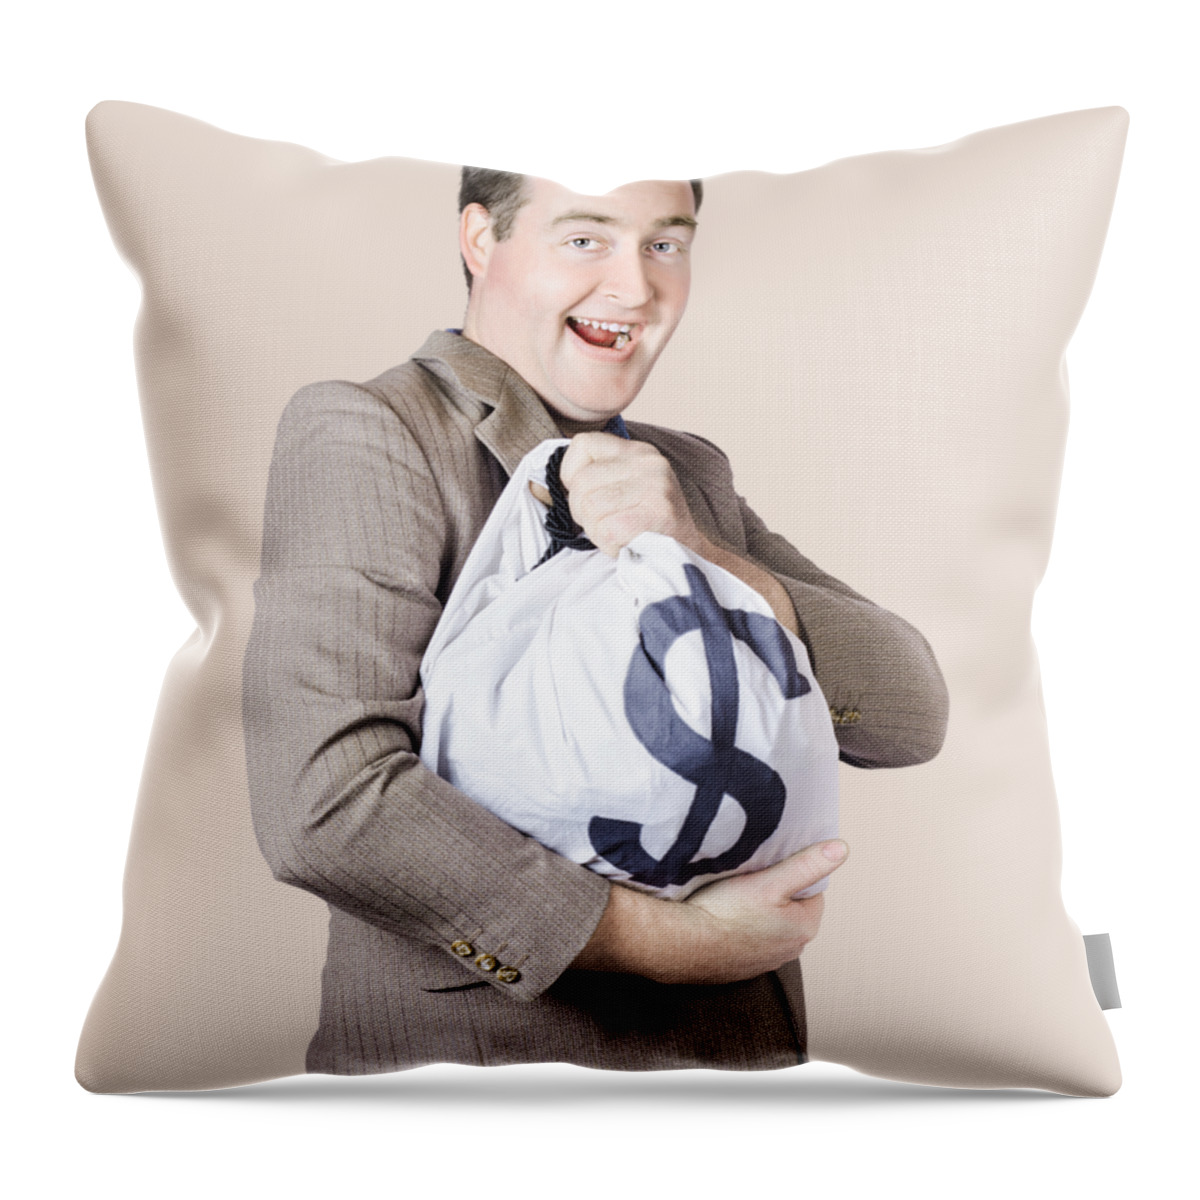 Money Throw Pillow featuring the photograph Man holding large sum of money in bank deposit bag by Jorgo Photography